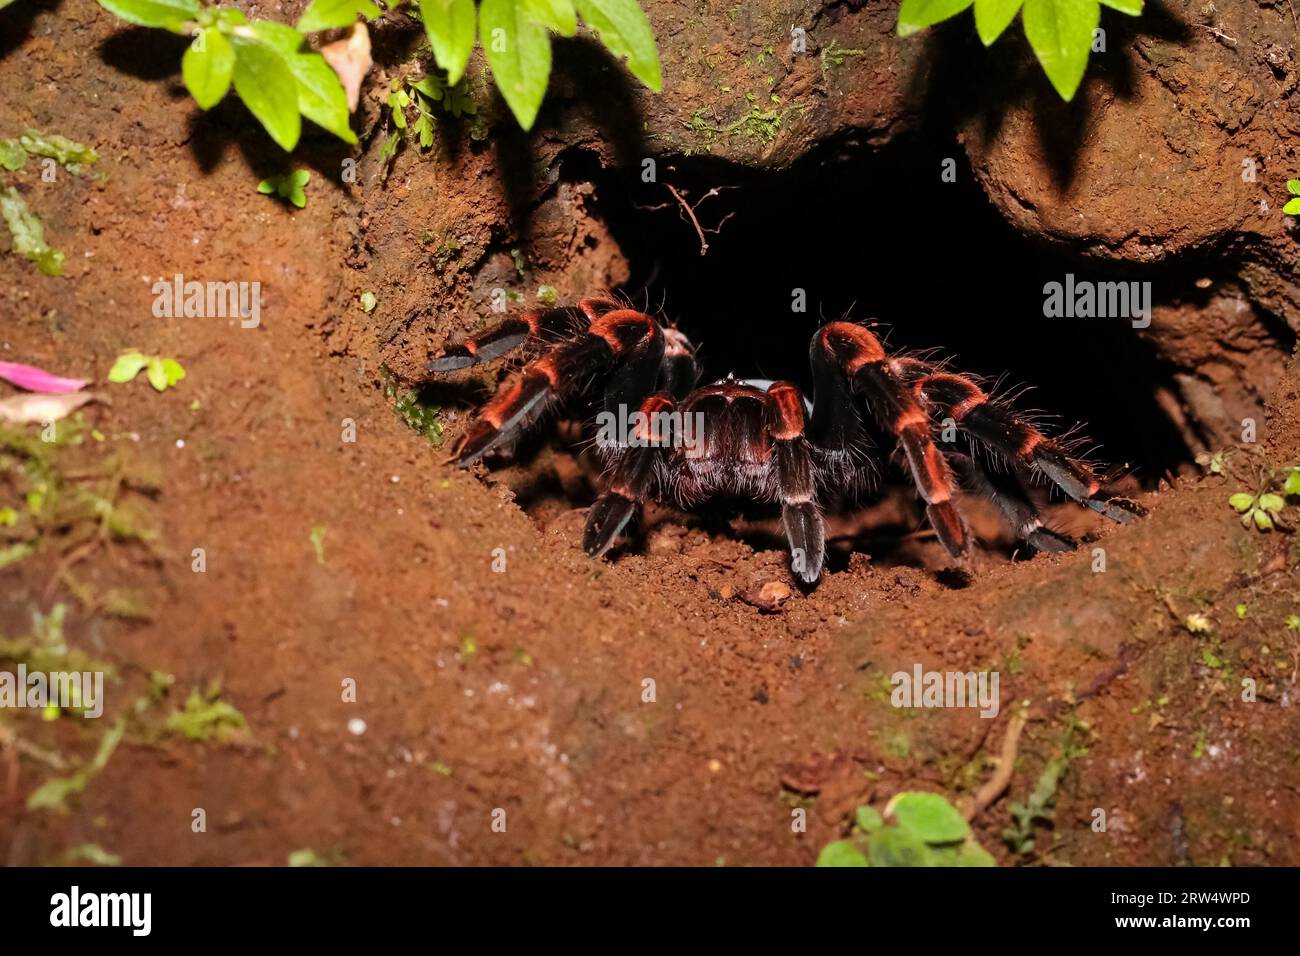 A red-knee tarantula in front of her cave in the Costa Rican jungle, Redknee tarantula at the entrance of her cave Stock Photo